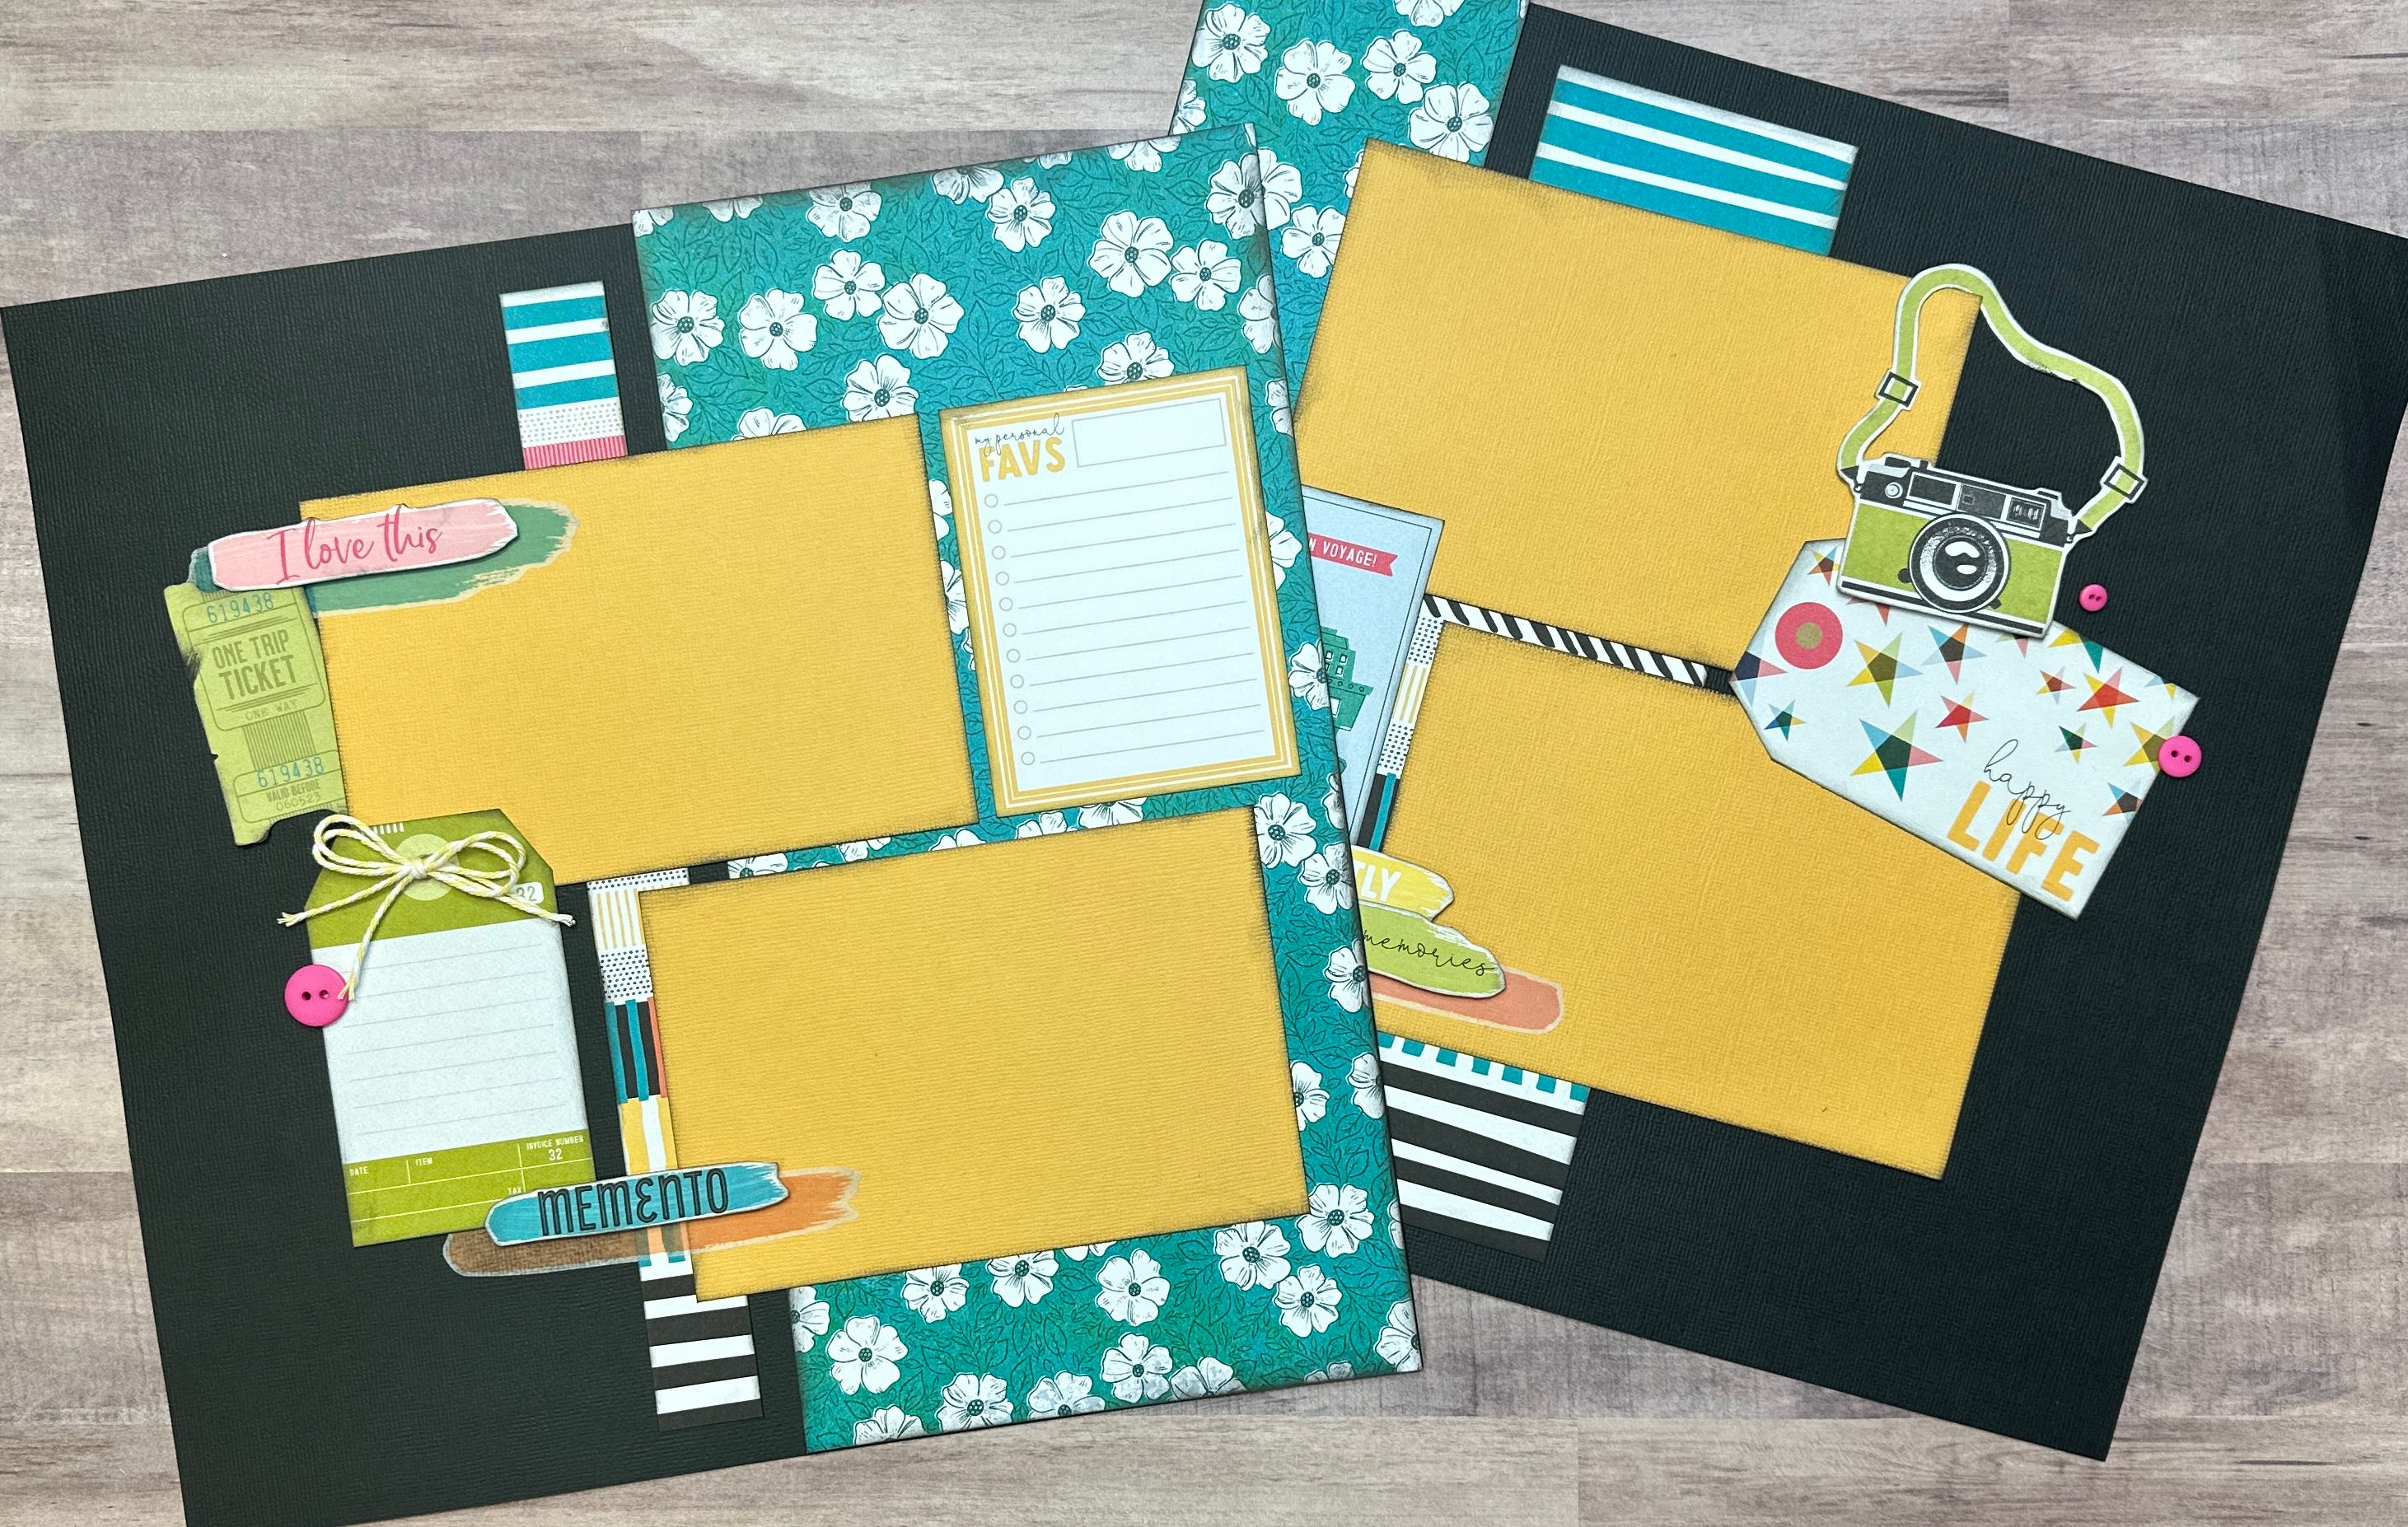 On The Road Again, Travel themed 2 page Scrapbooking Layout Kit